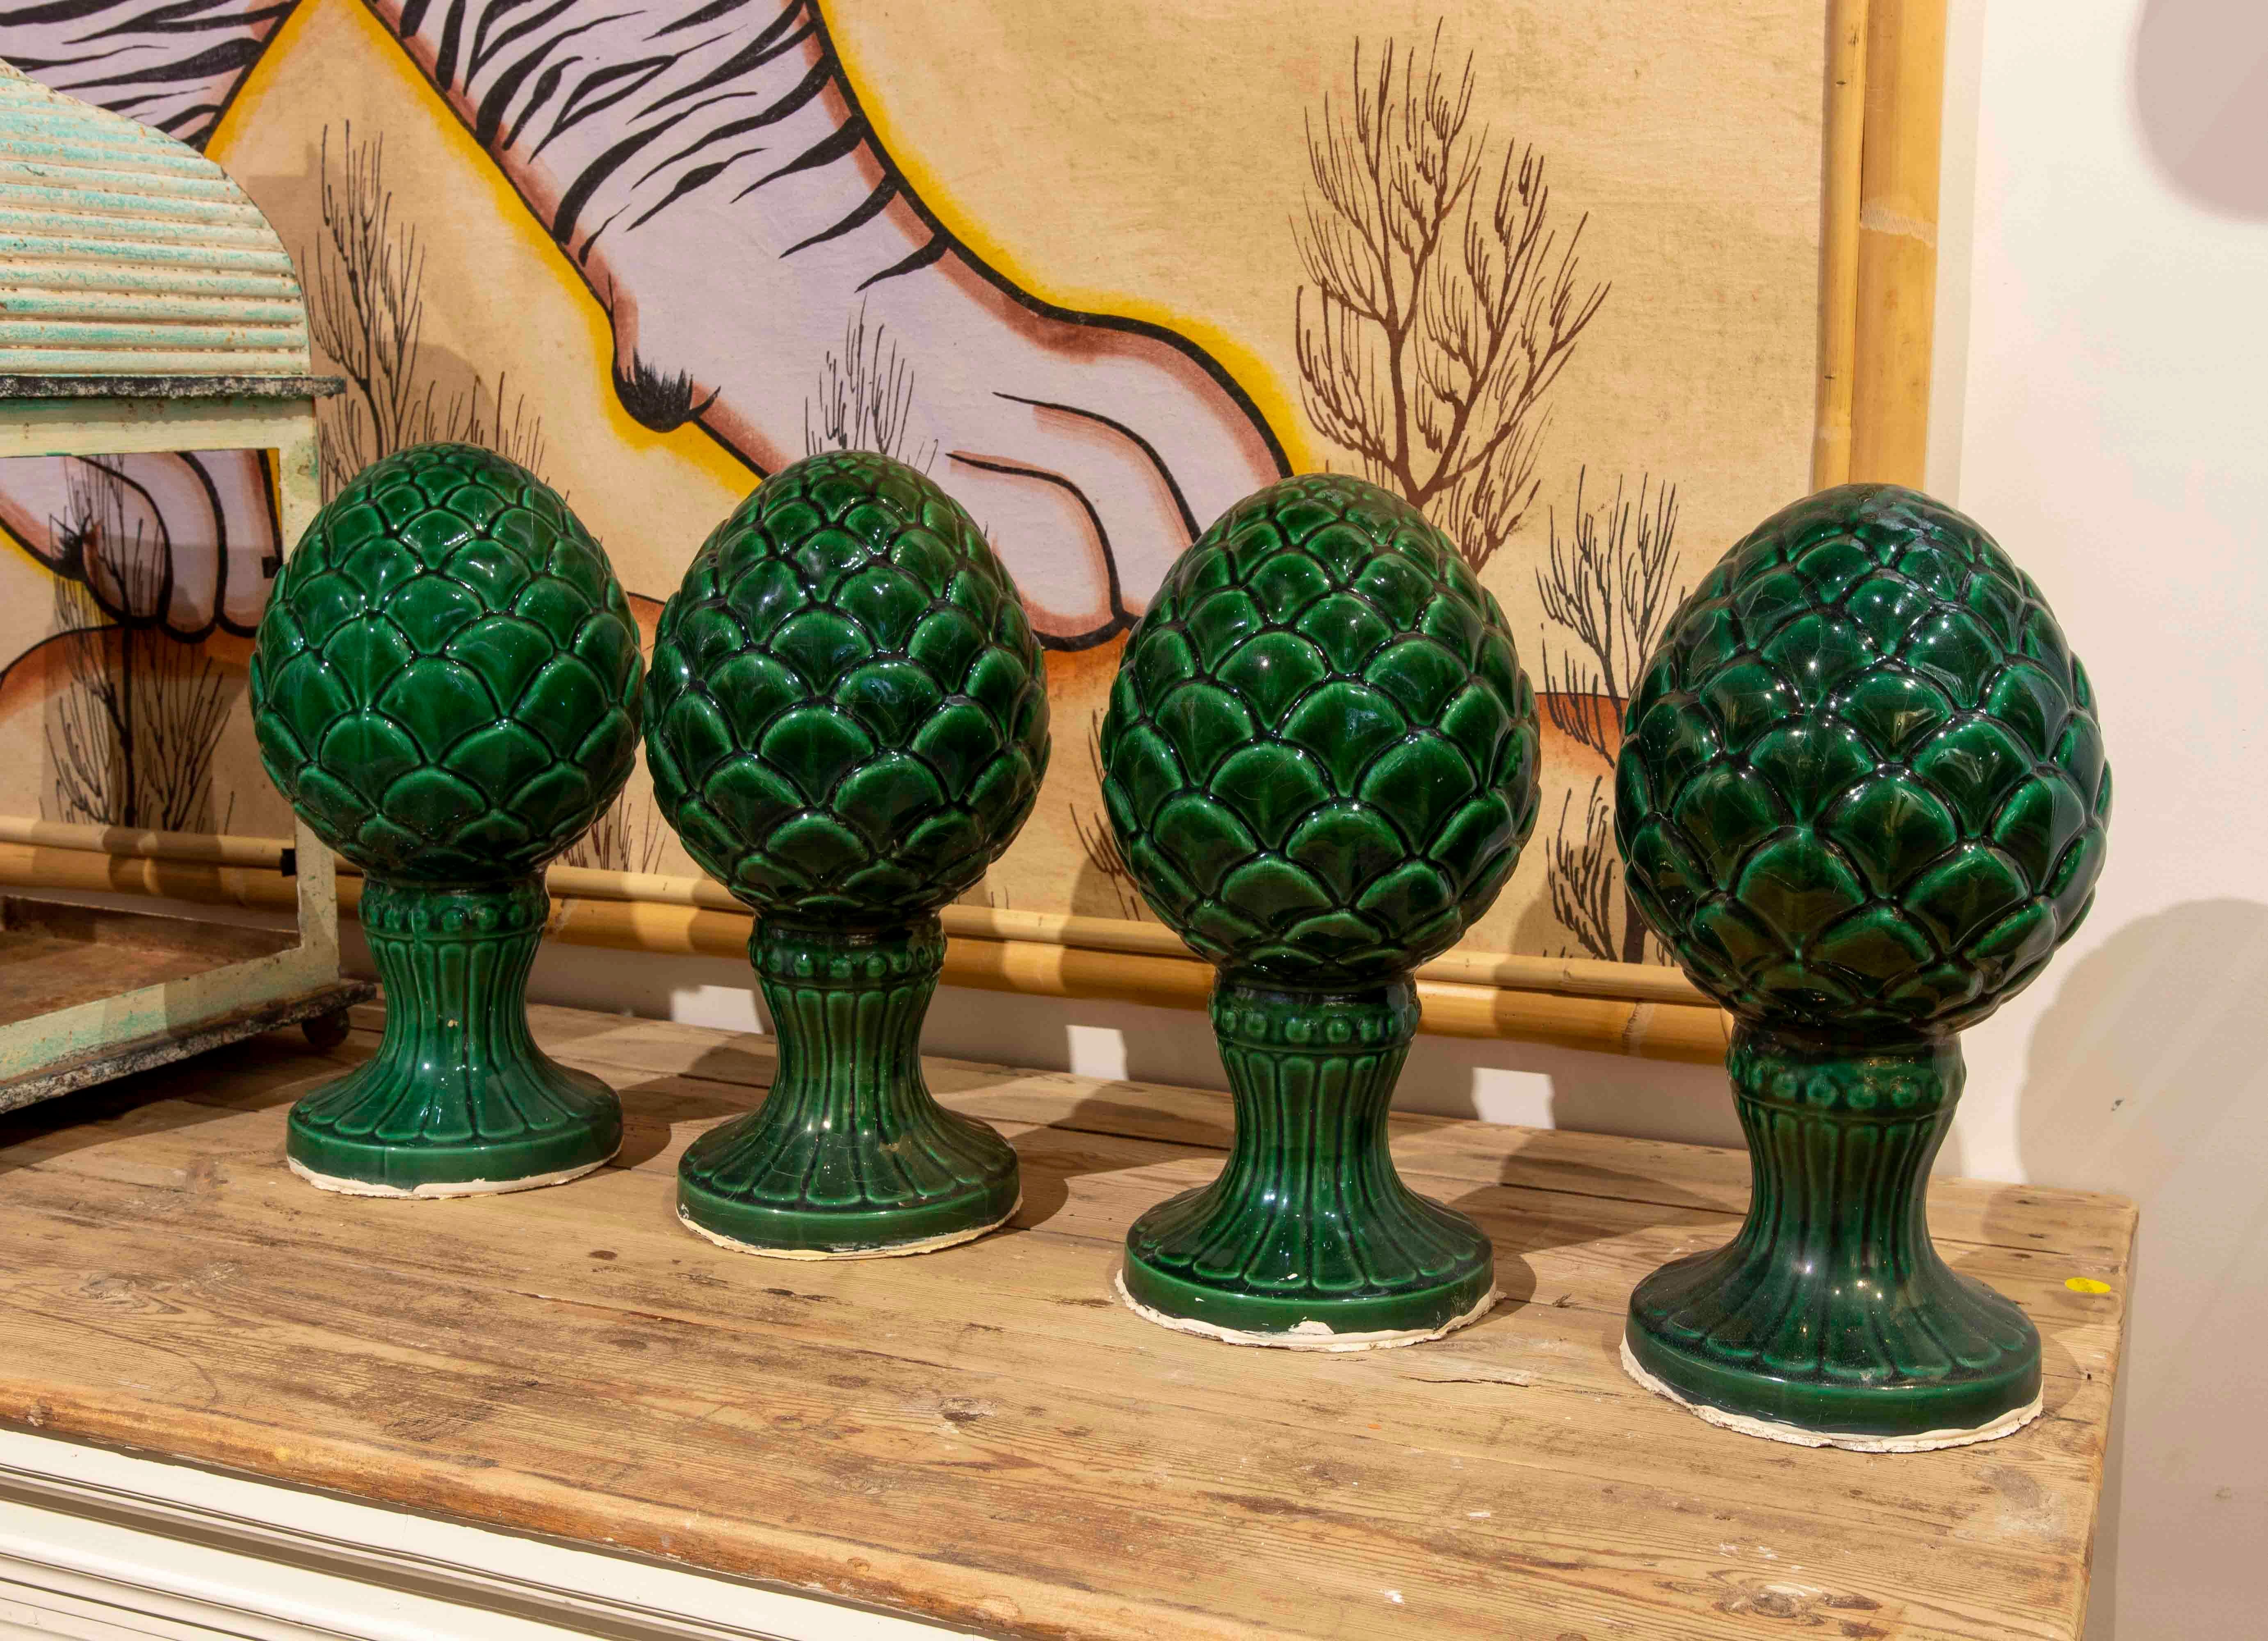 Spanish Set of Four Green Glazed Ceramic Finials in the Shape of Pineapples For Sale